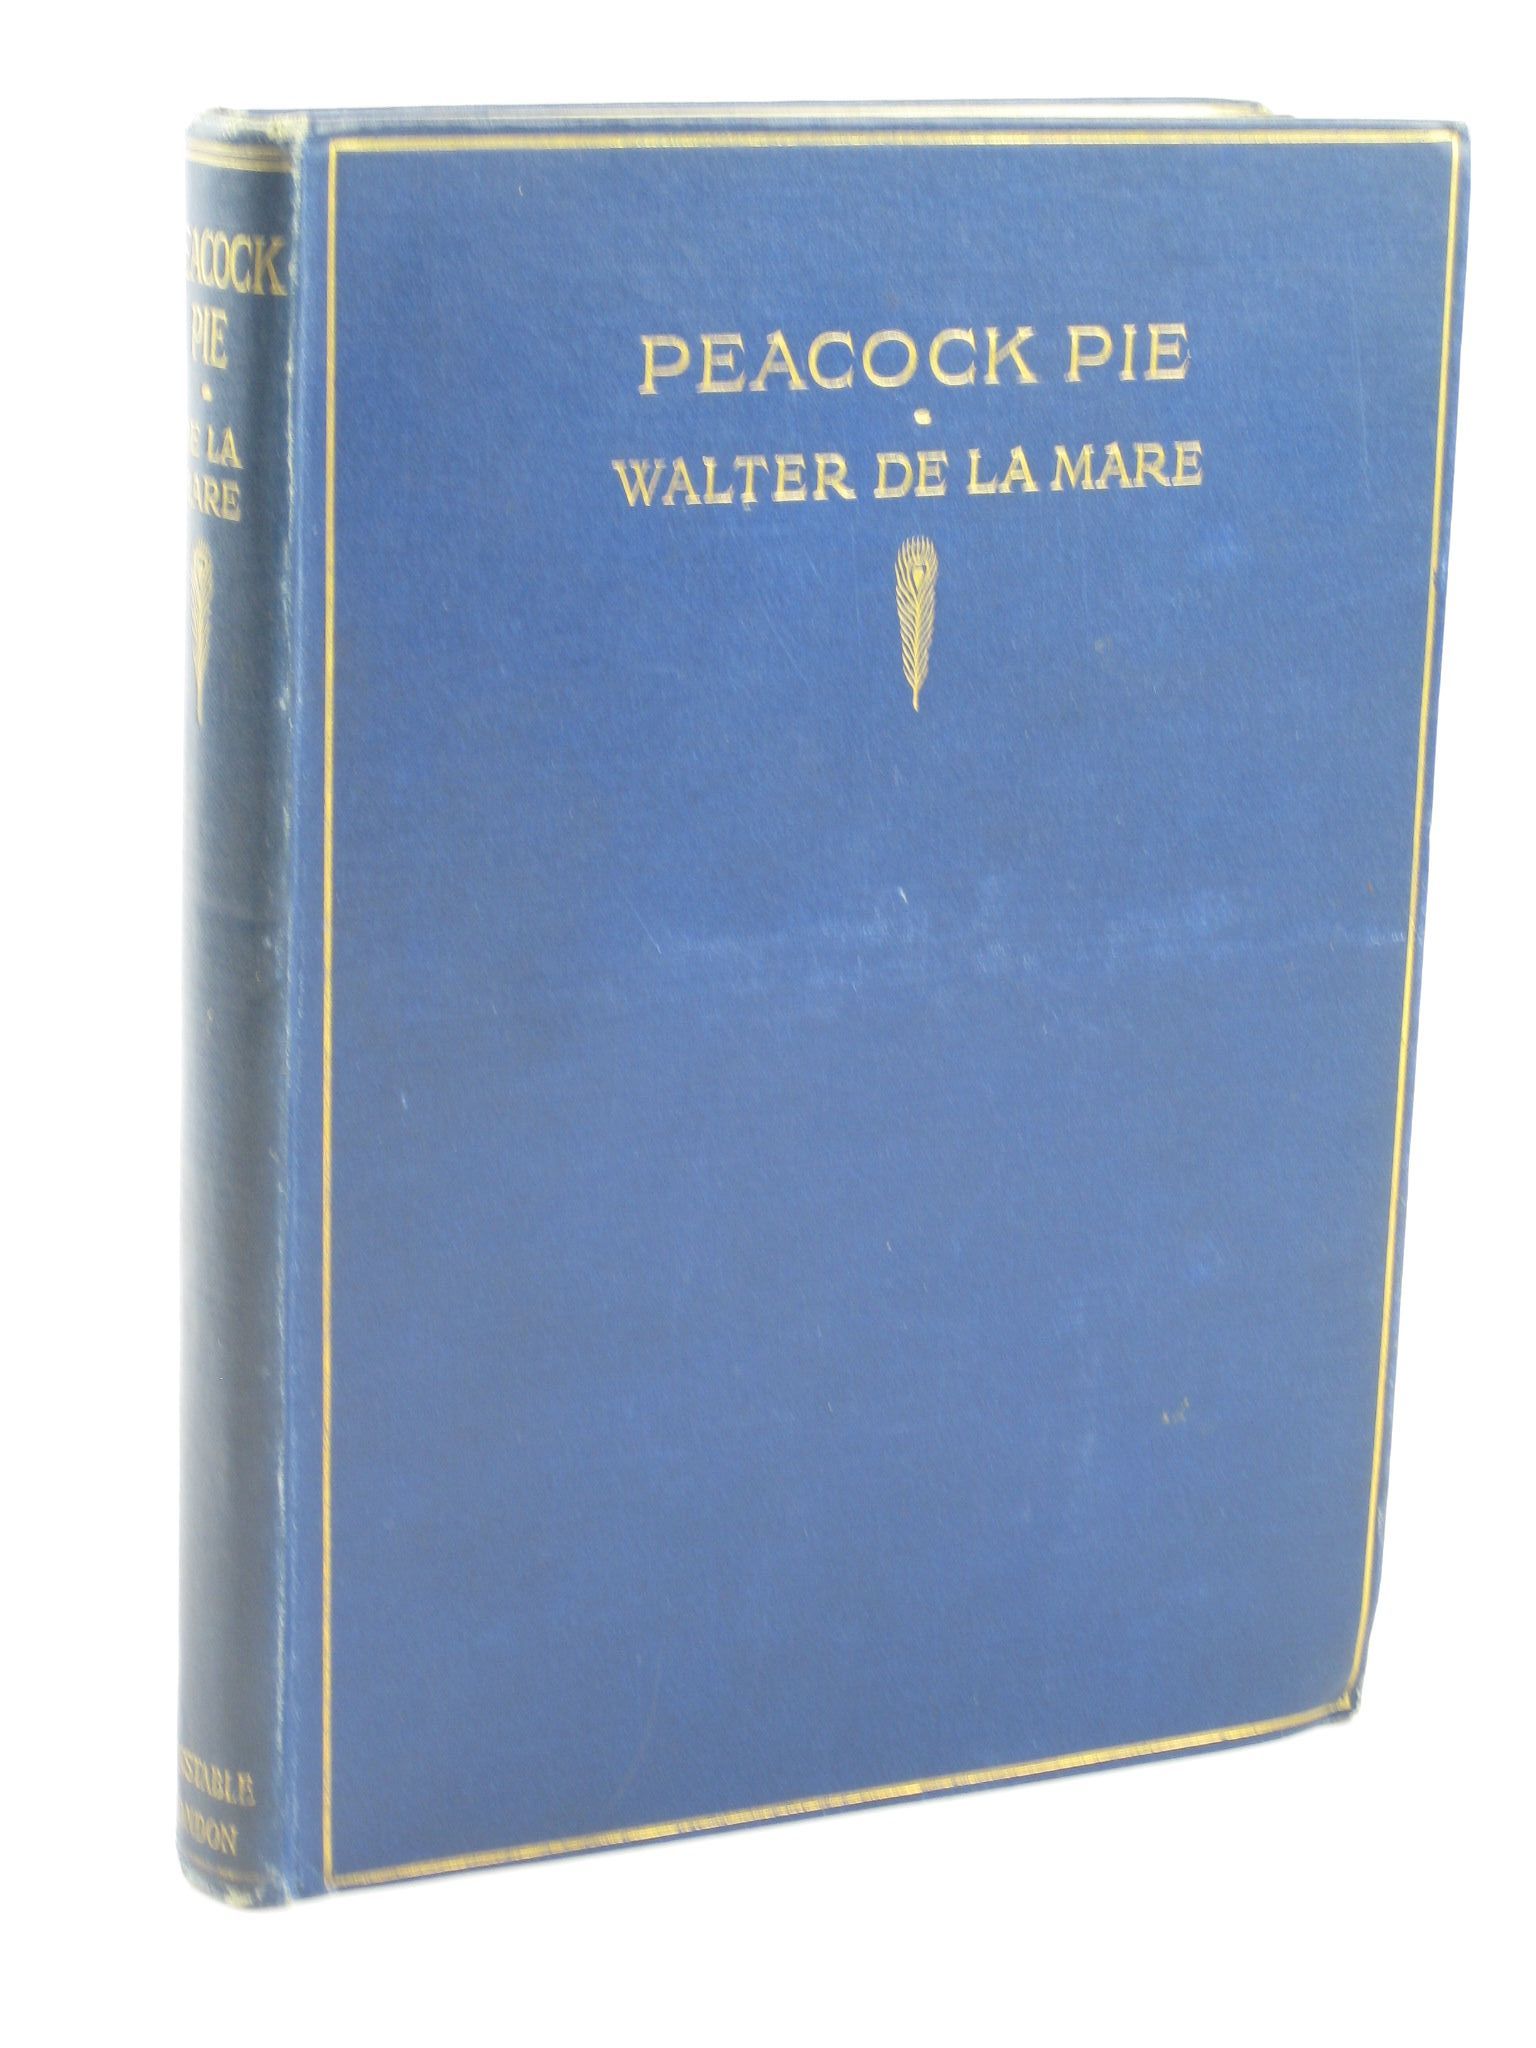 Photo of PEACOCK PIE written by De La Mare, Walter published by Constable and Company Ltd. (STOCK CODE: 1310987)  for sale by Stella & Rose's Books